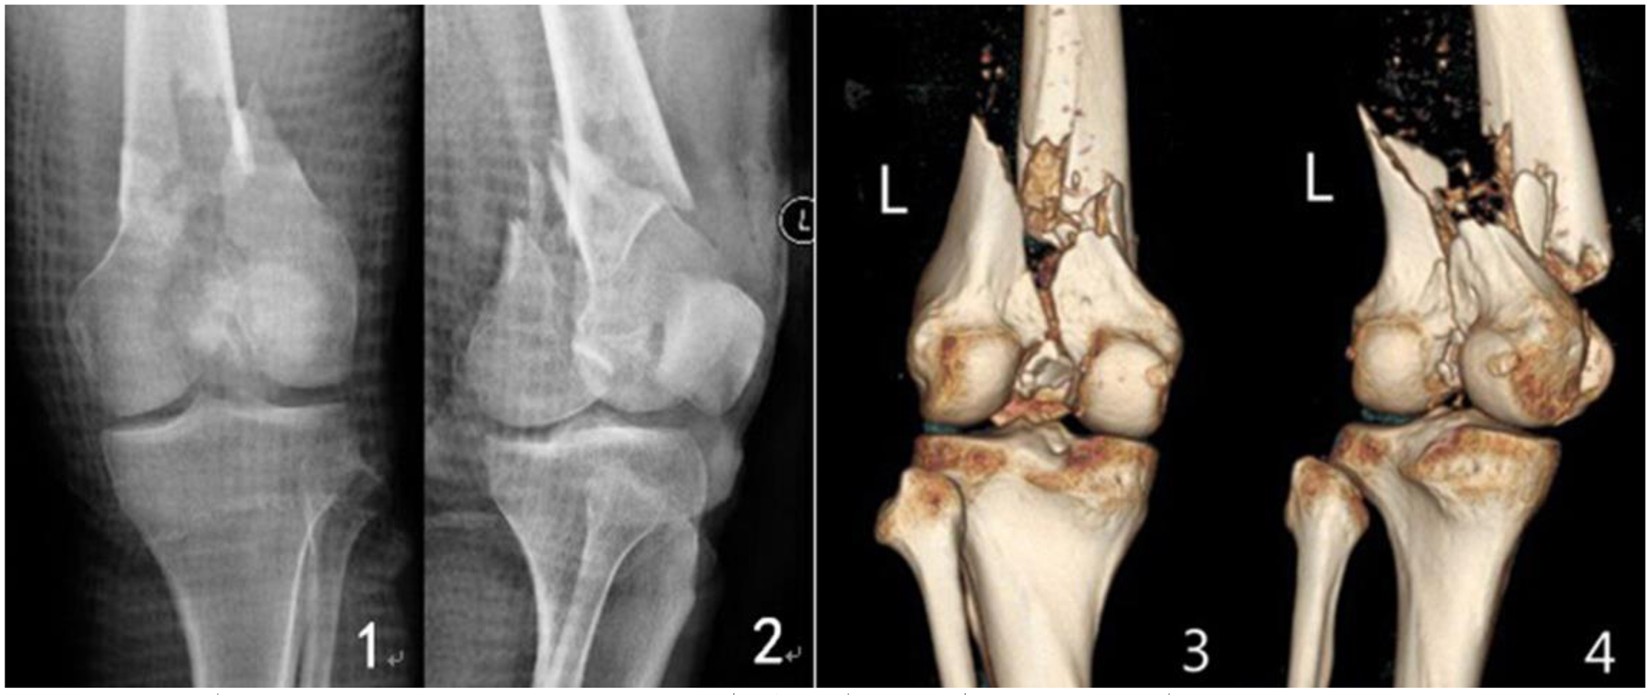 Evolution of Intramedullary Nails for Long Bone Fractures in the Lower Limb  | SpringerLink